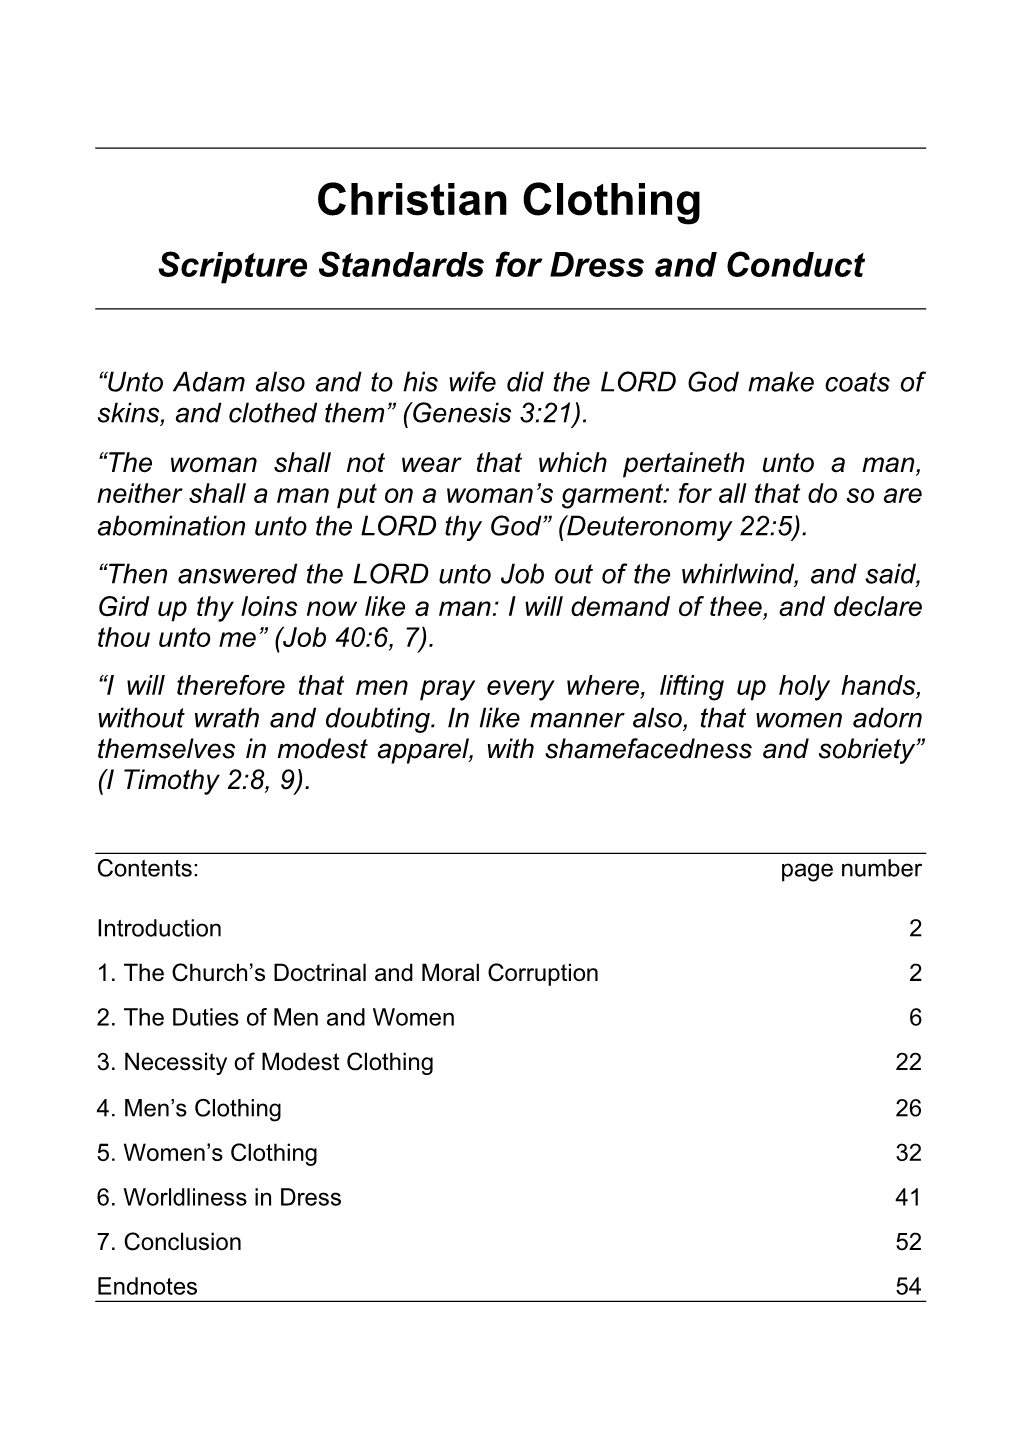 Christian Clothing Scripture Standards for Dress and Conduct